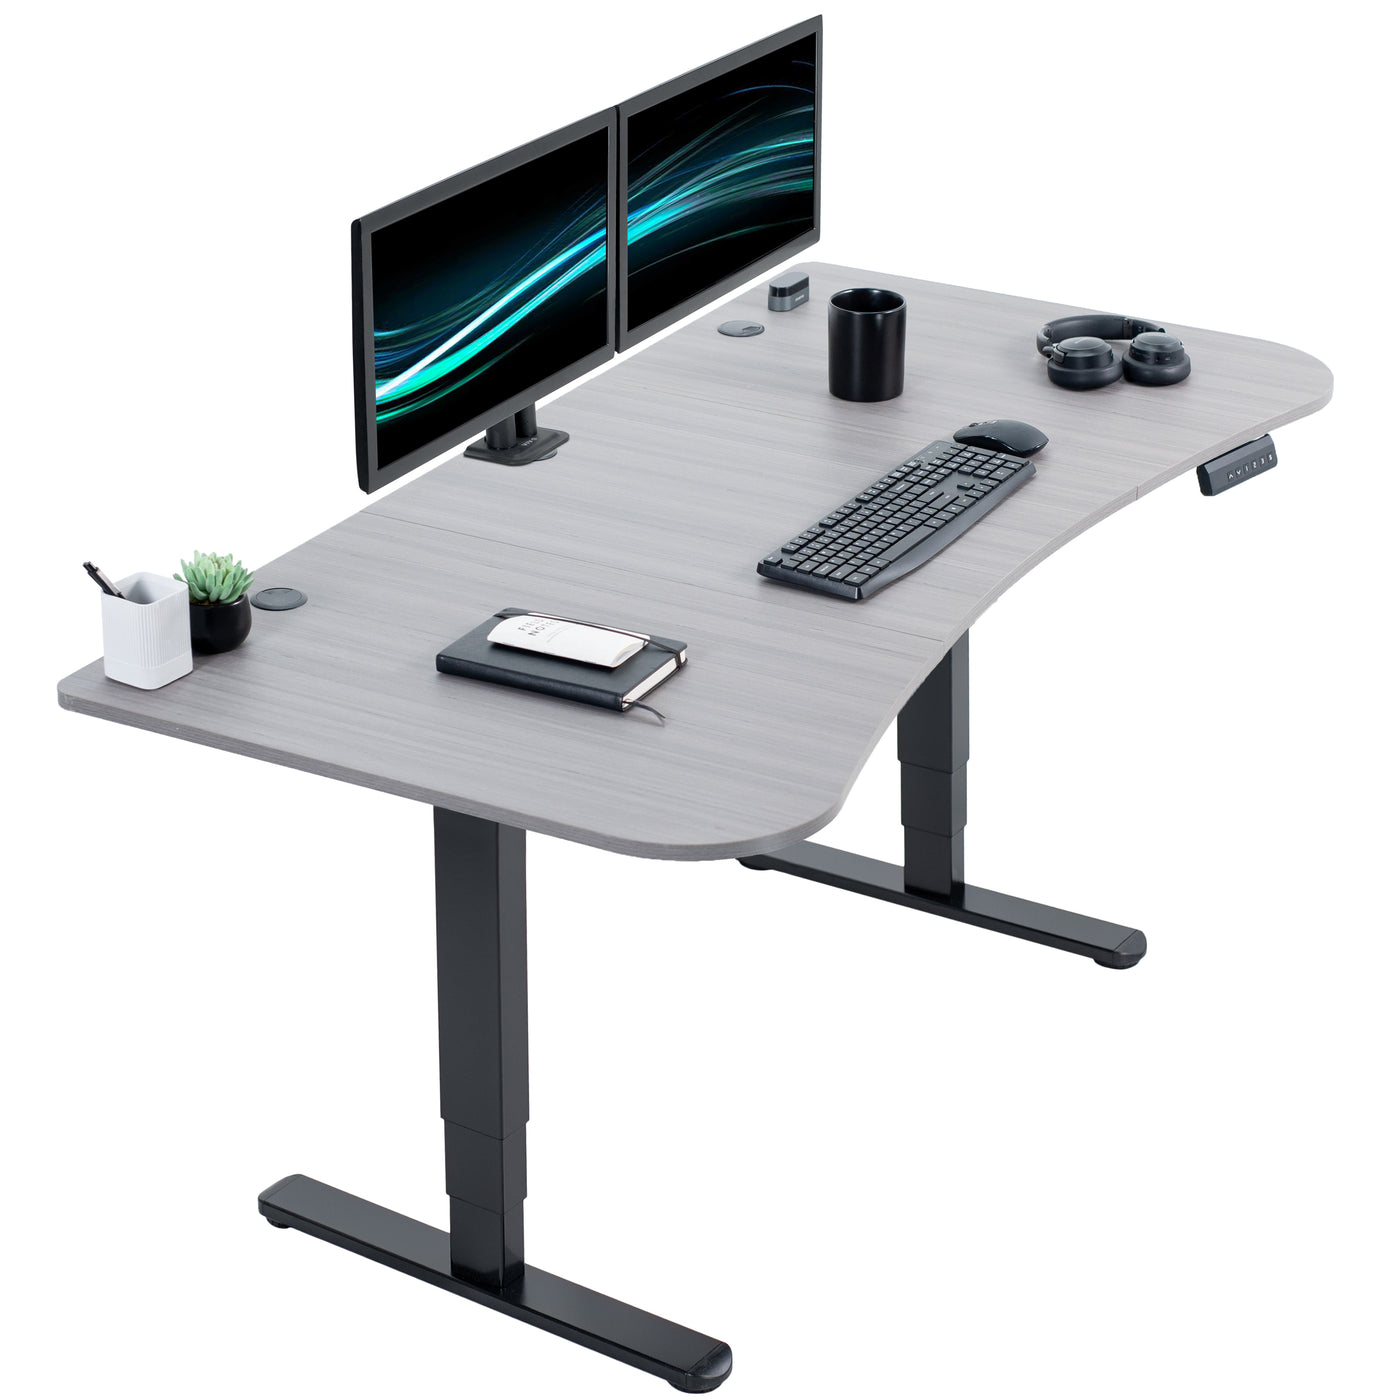 Large standing desk featuring smooth height adjustment, powerful dual motors, and a simple push-button controller featuring memory presets.